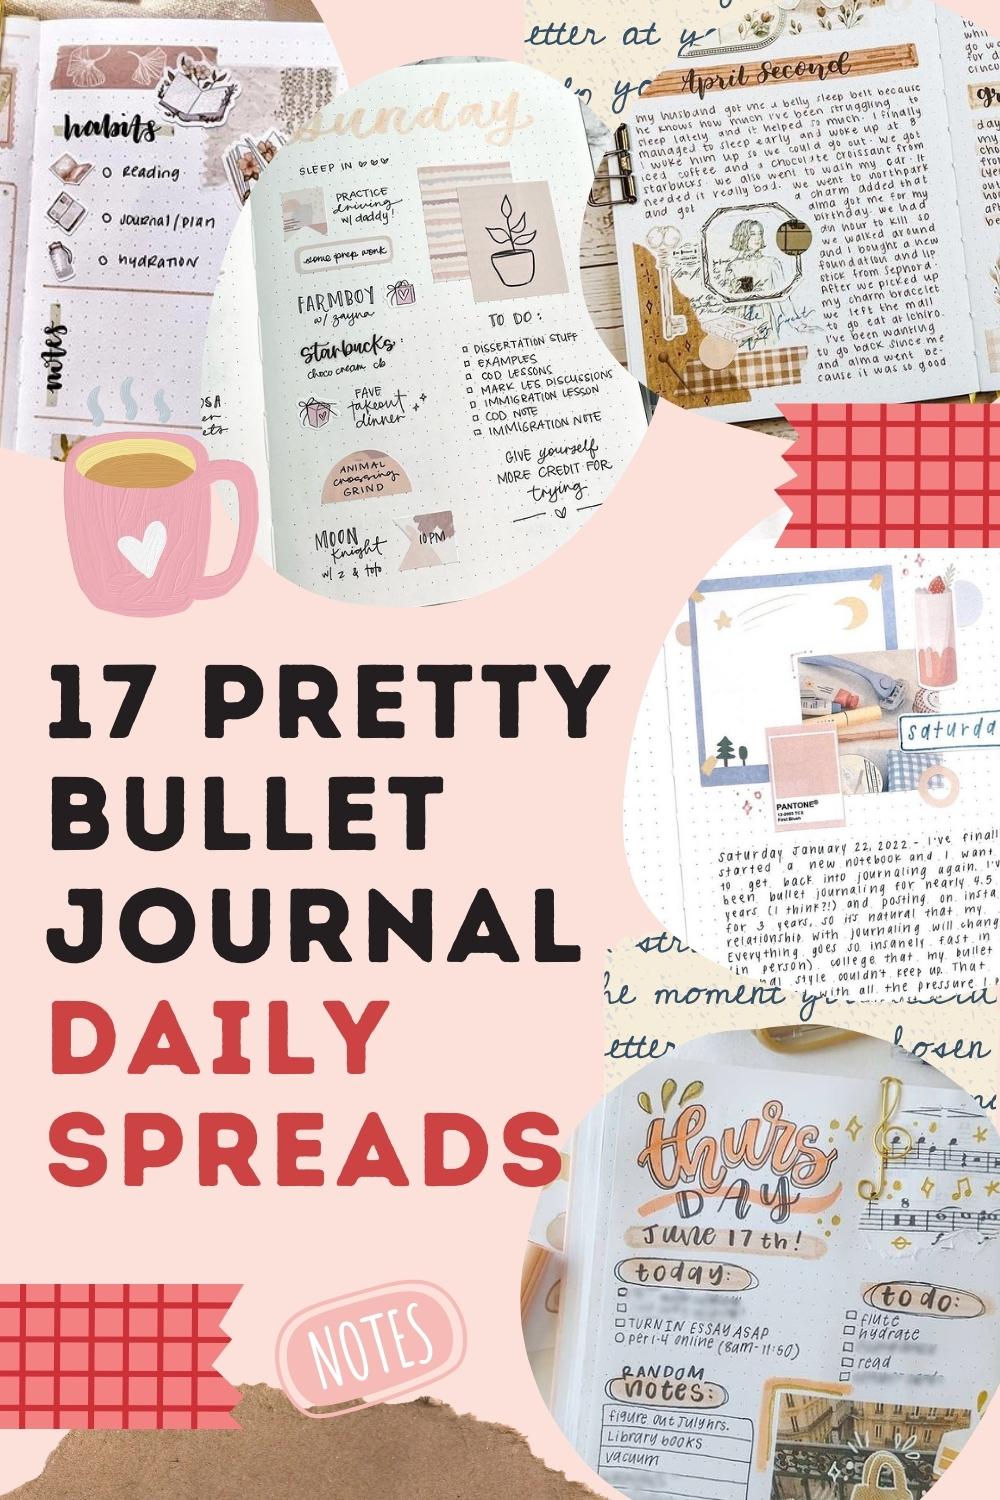 https://www.clementinecreative.co.za/wp-content/uploads/2022/08/pretty-bullet-journal-daily-layouts.jpg